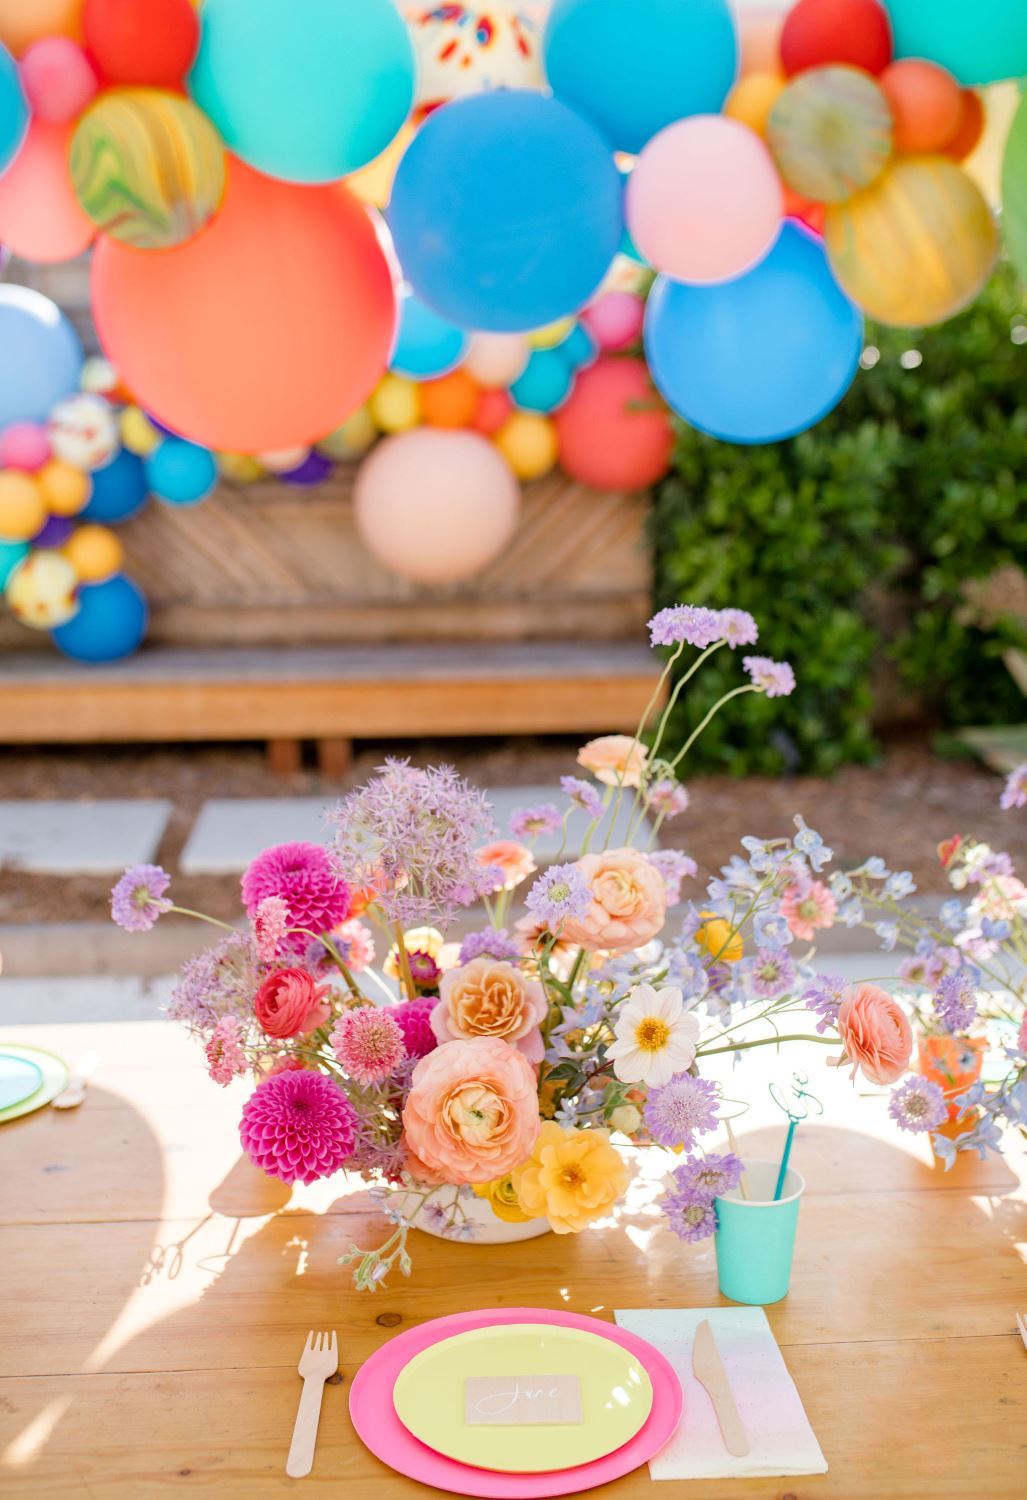 Tie-dye party table setting